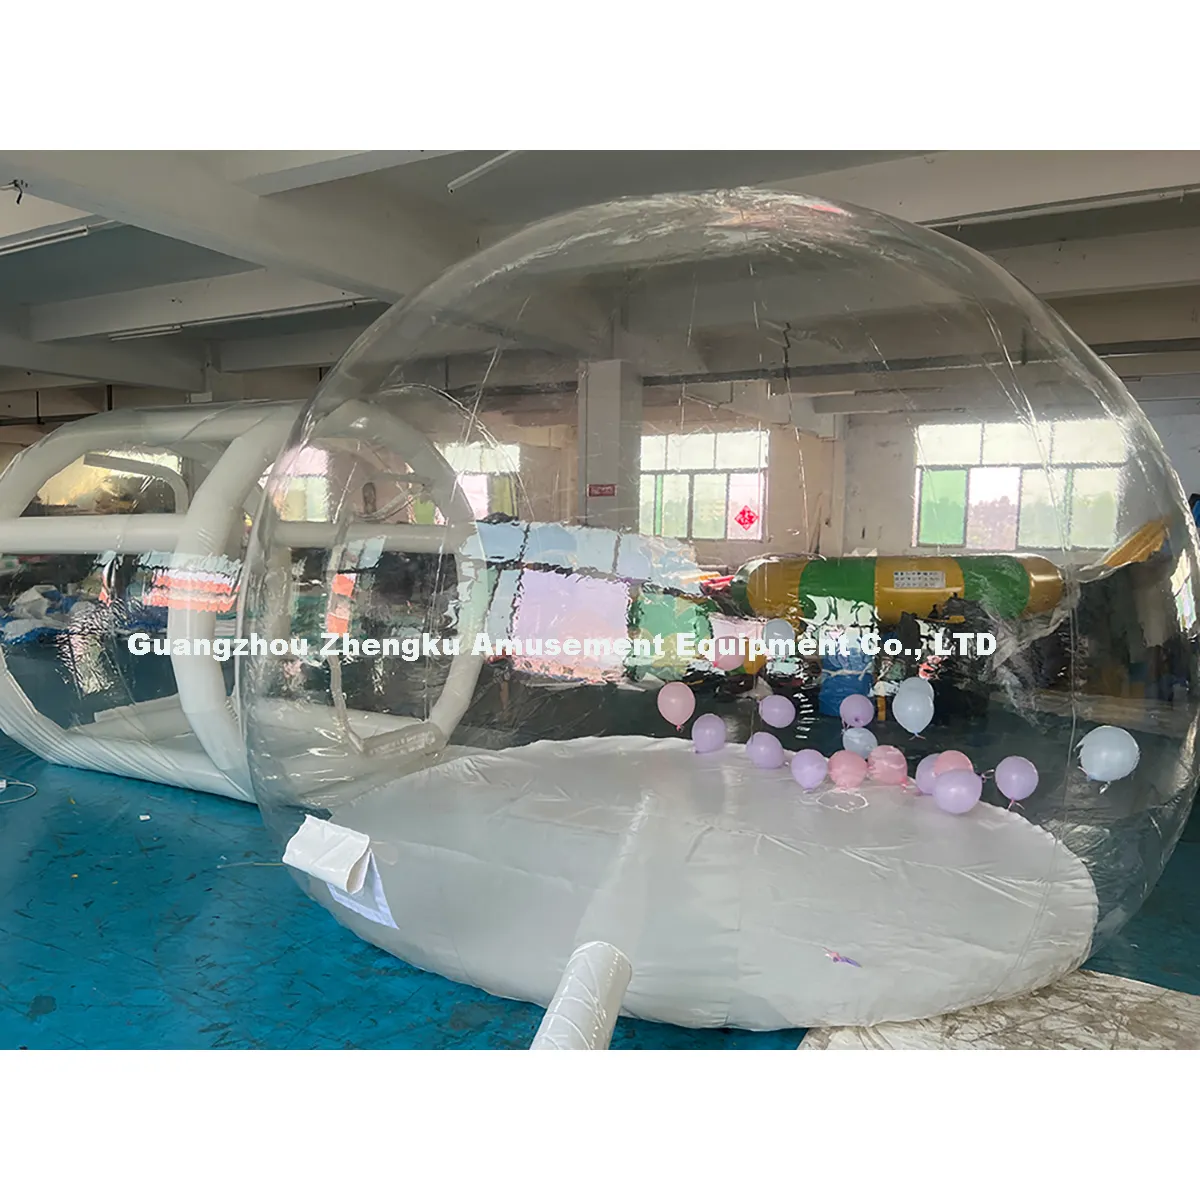 Custom-made inflatable camping dome tent transparent inflatable bubble balloon house for outdoor party